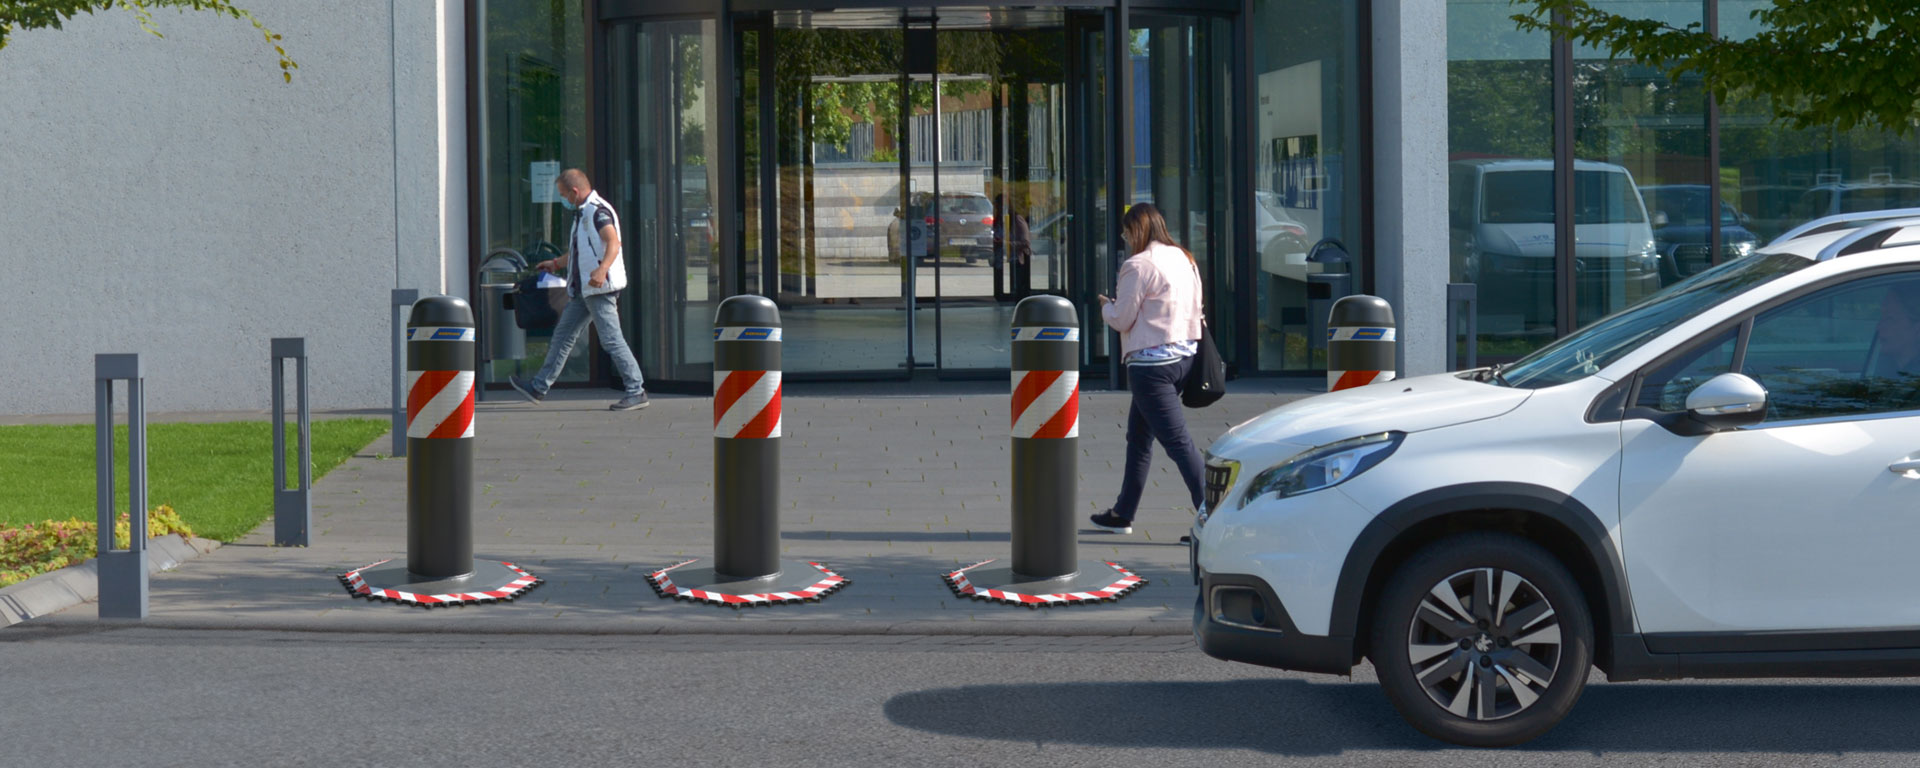 Mobile vehicle barriers